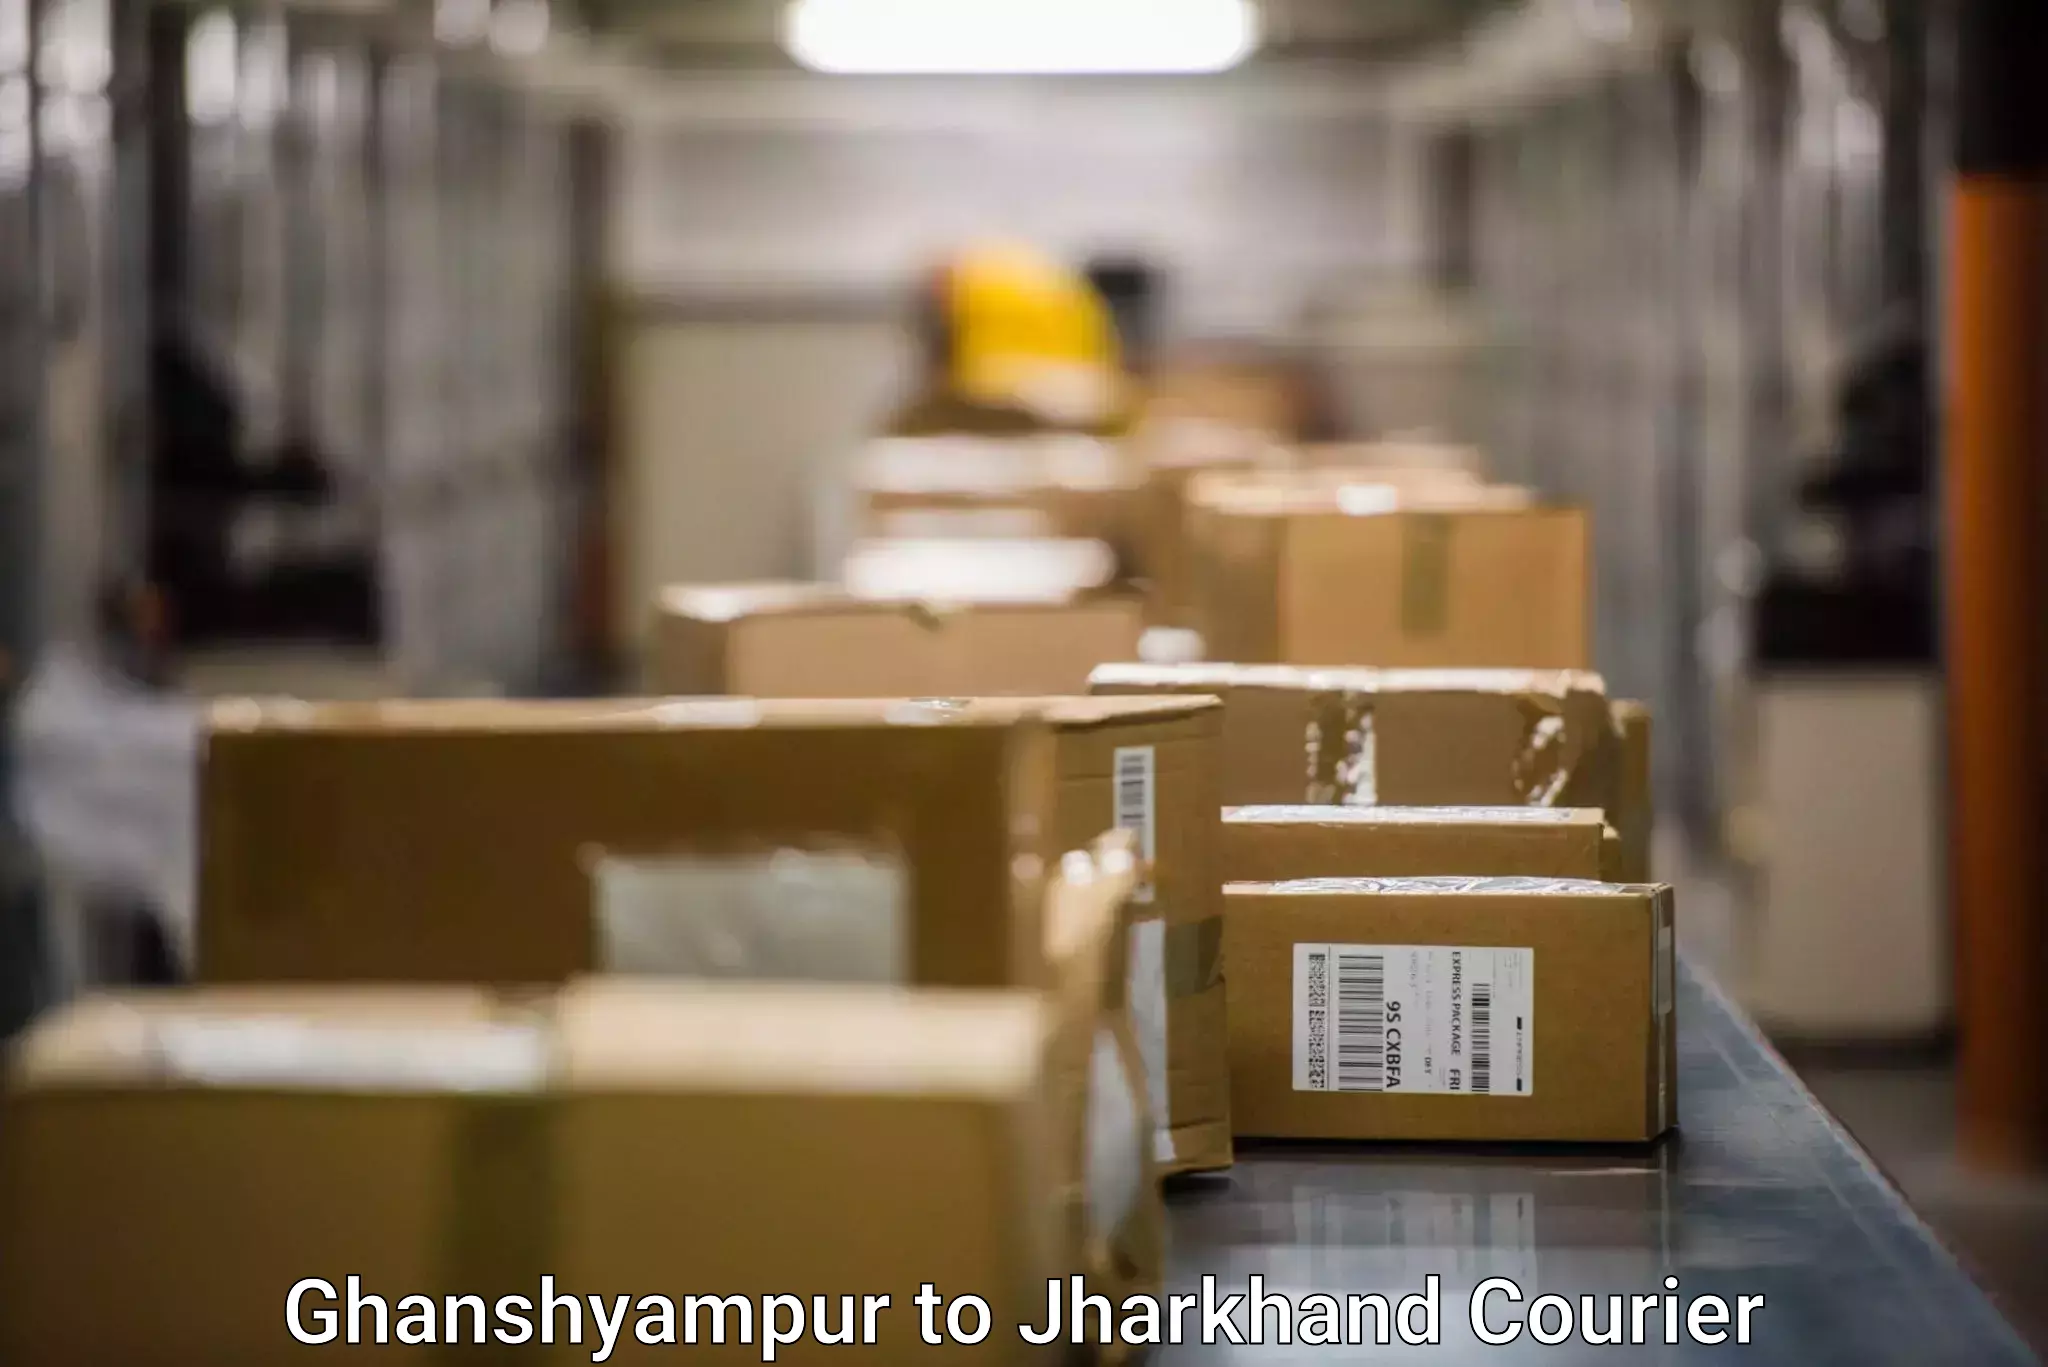 Courier service efficiency Ghanshyampur to Ramgarh